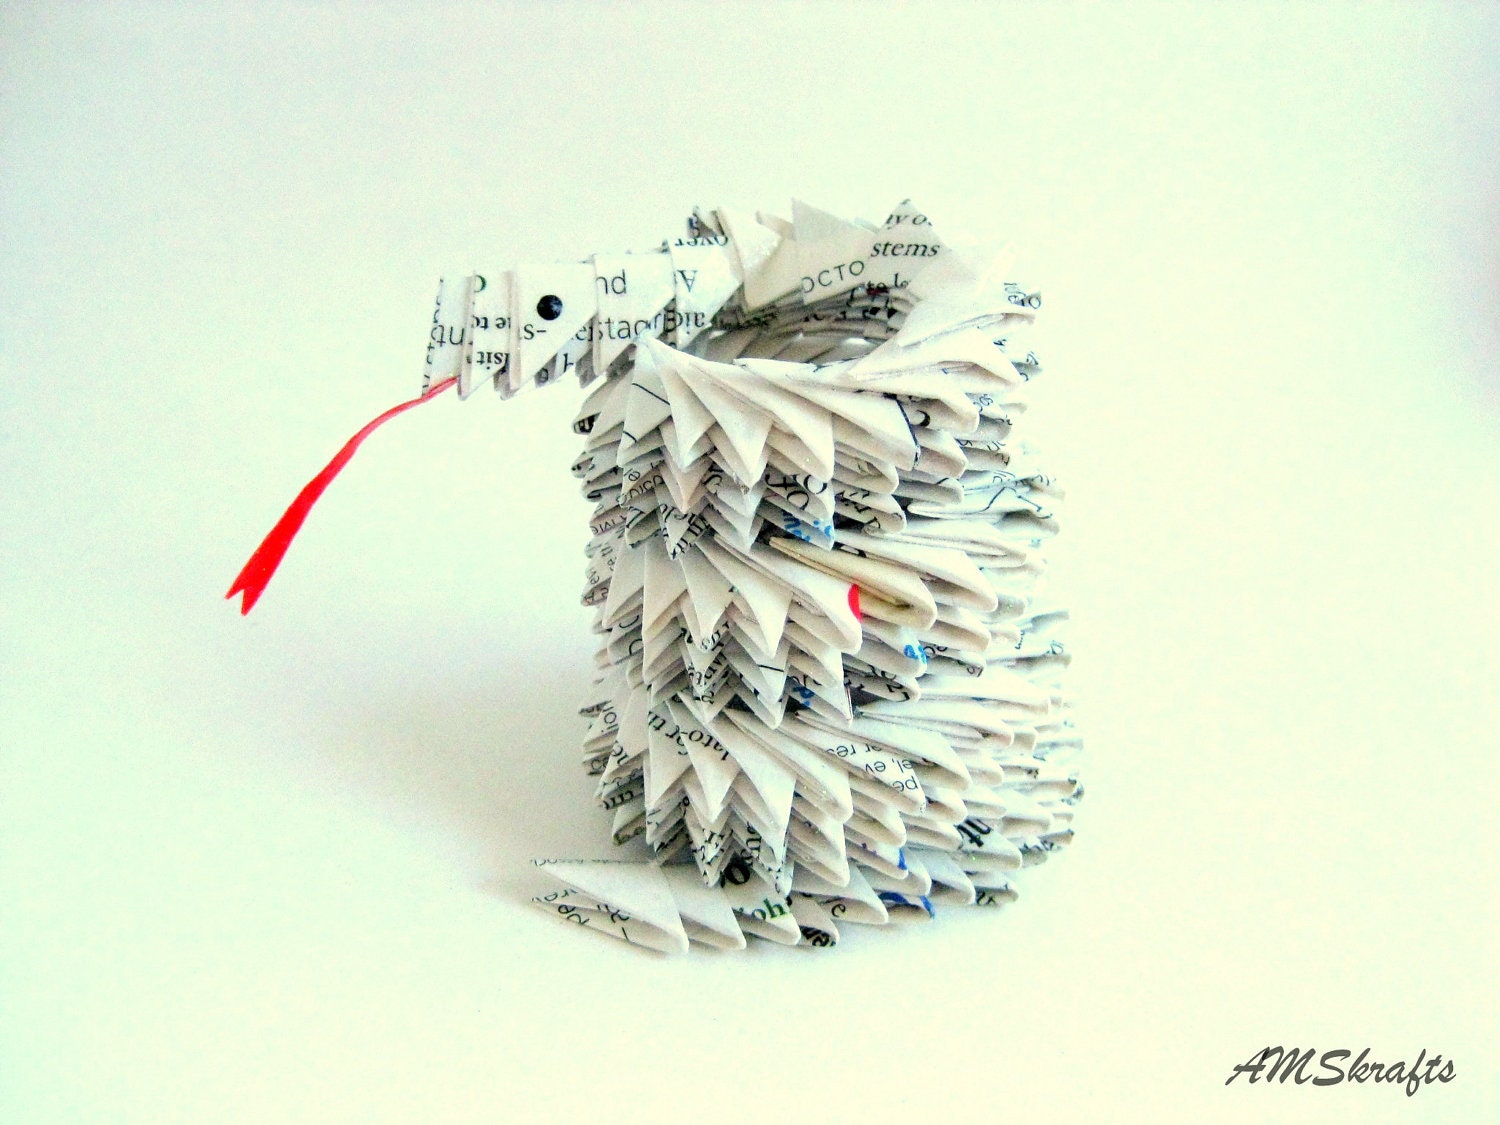 Recycled Magazine Origami Snake Sculpture